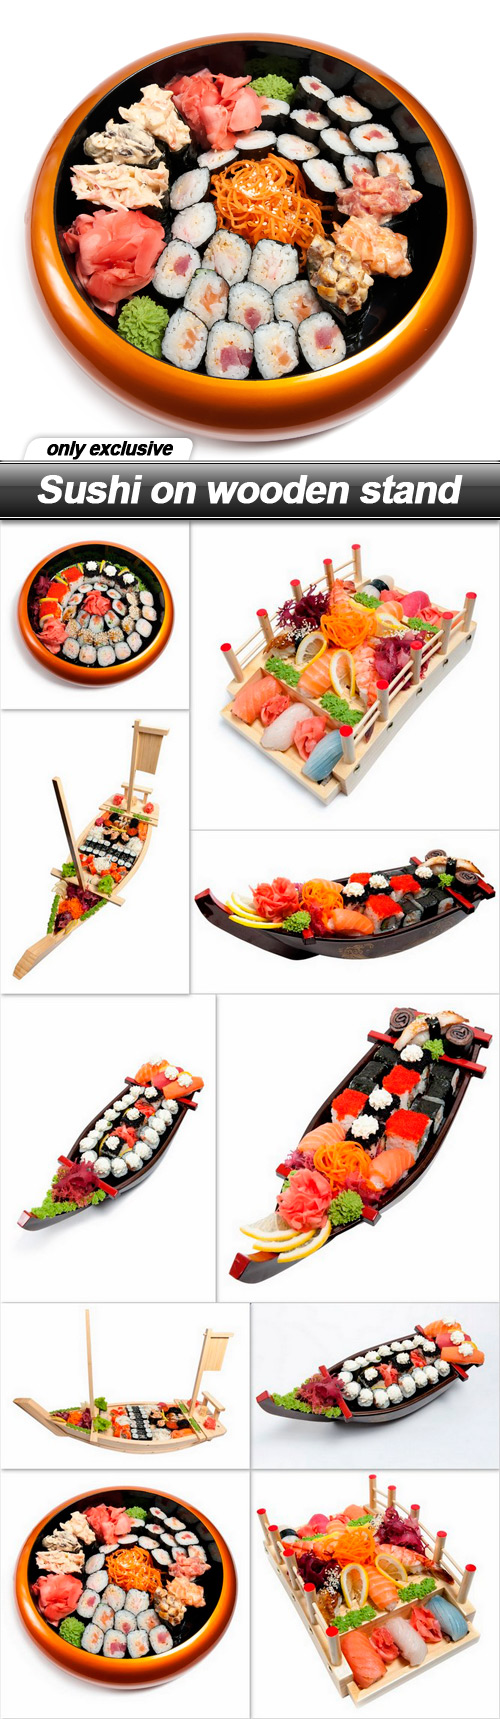 Sushi on wooden stand - 10 UHQ JPEG